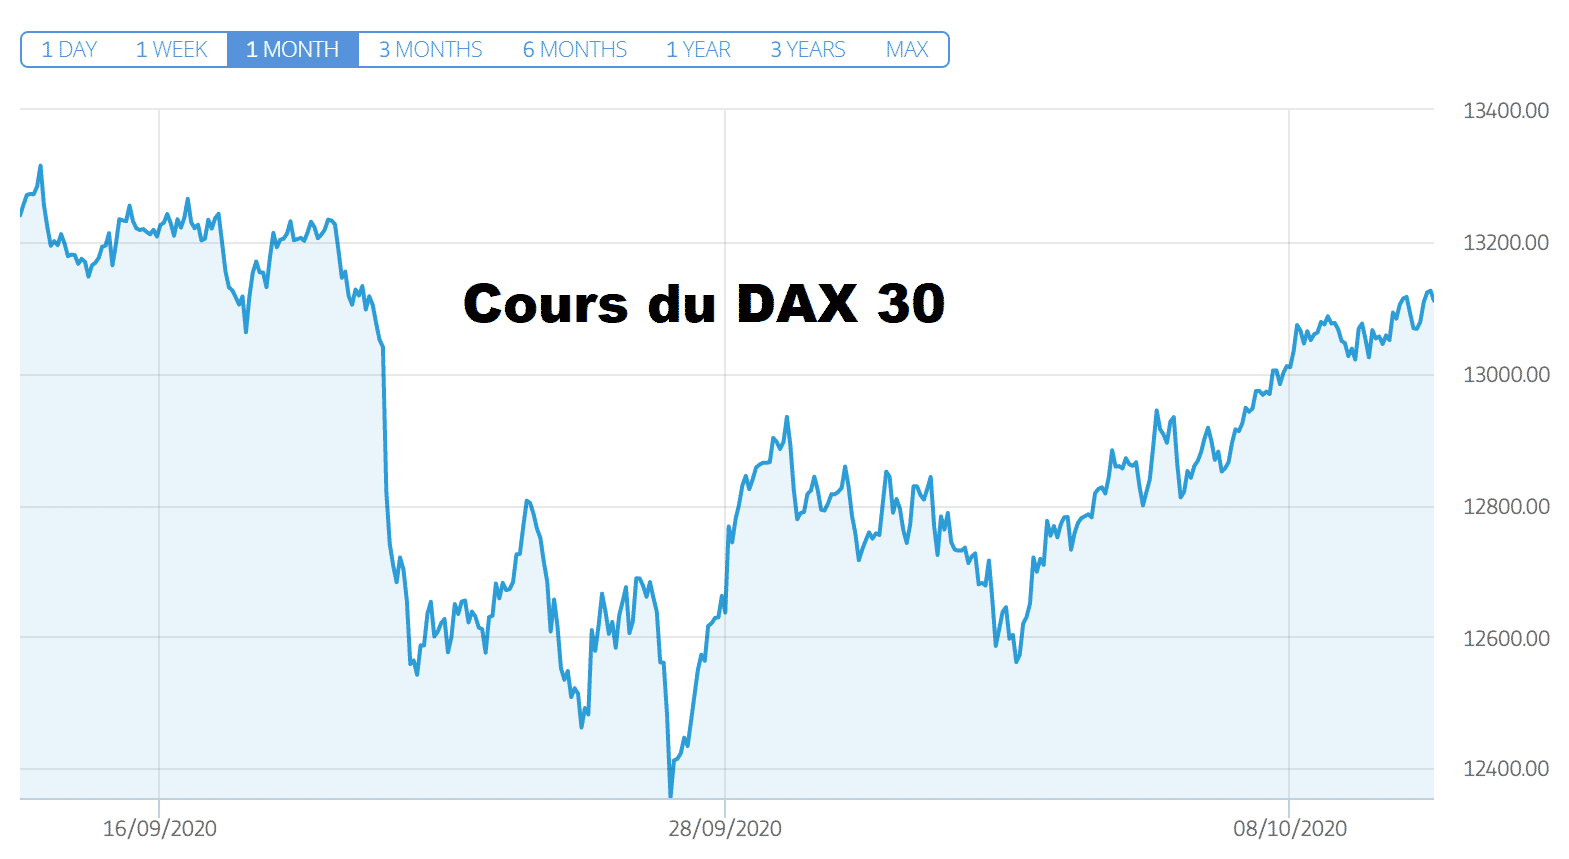 cours ger30 DAX 30 lundi 12 octobre 2020cours ger30 DAX 30 lundi 12 octobre 2020